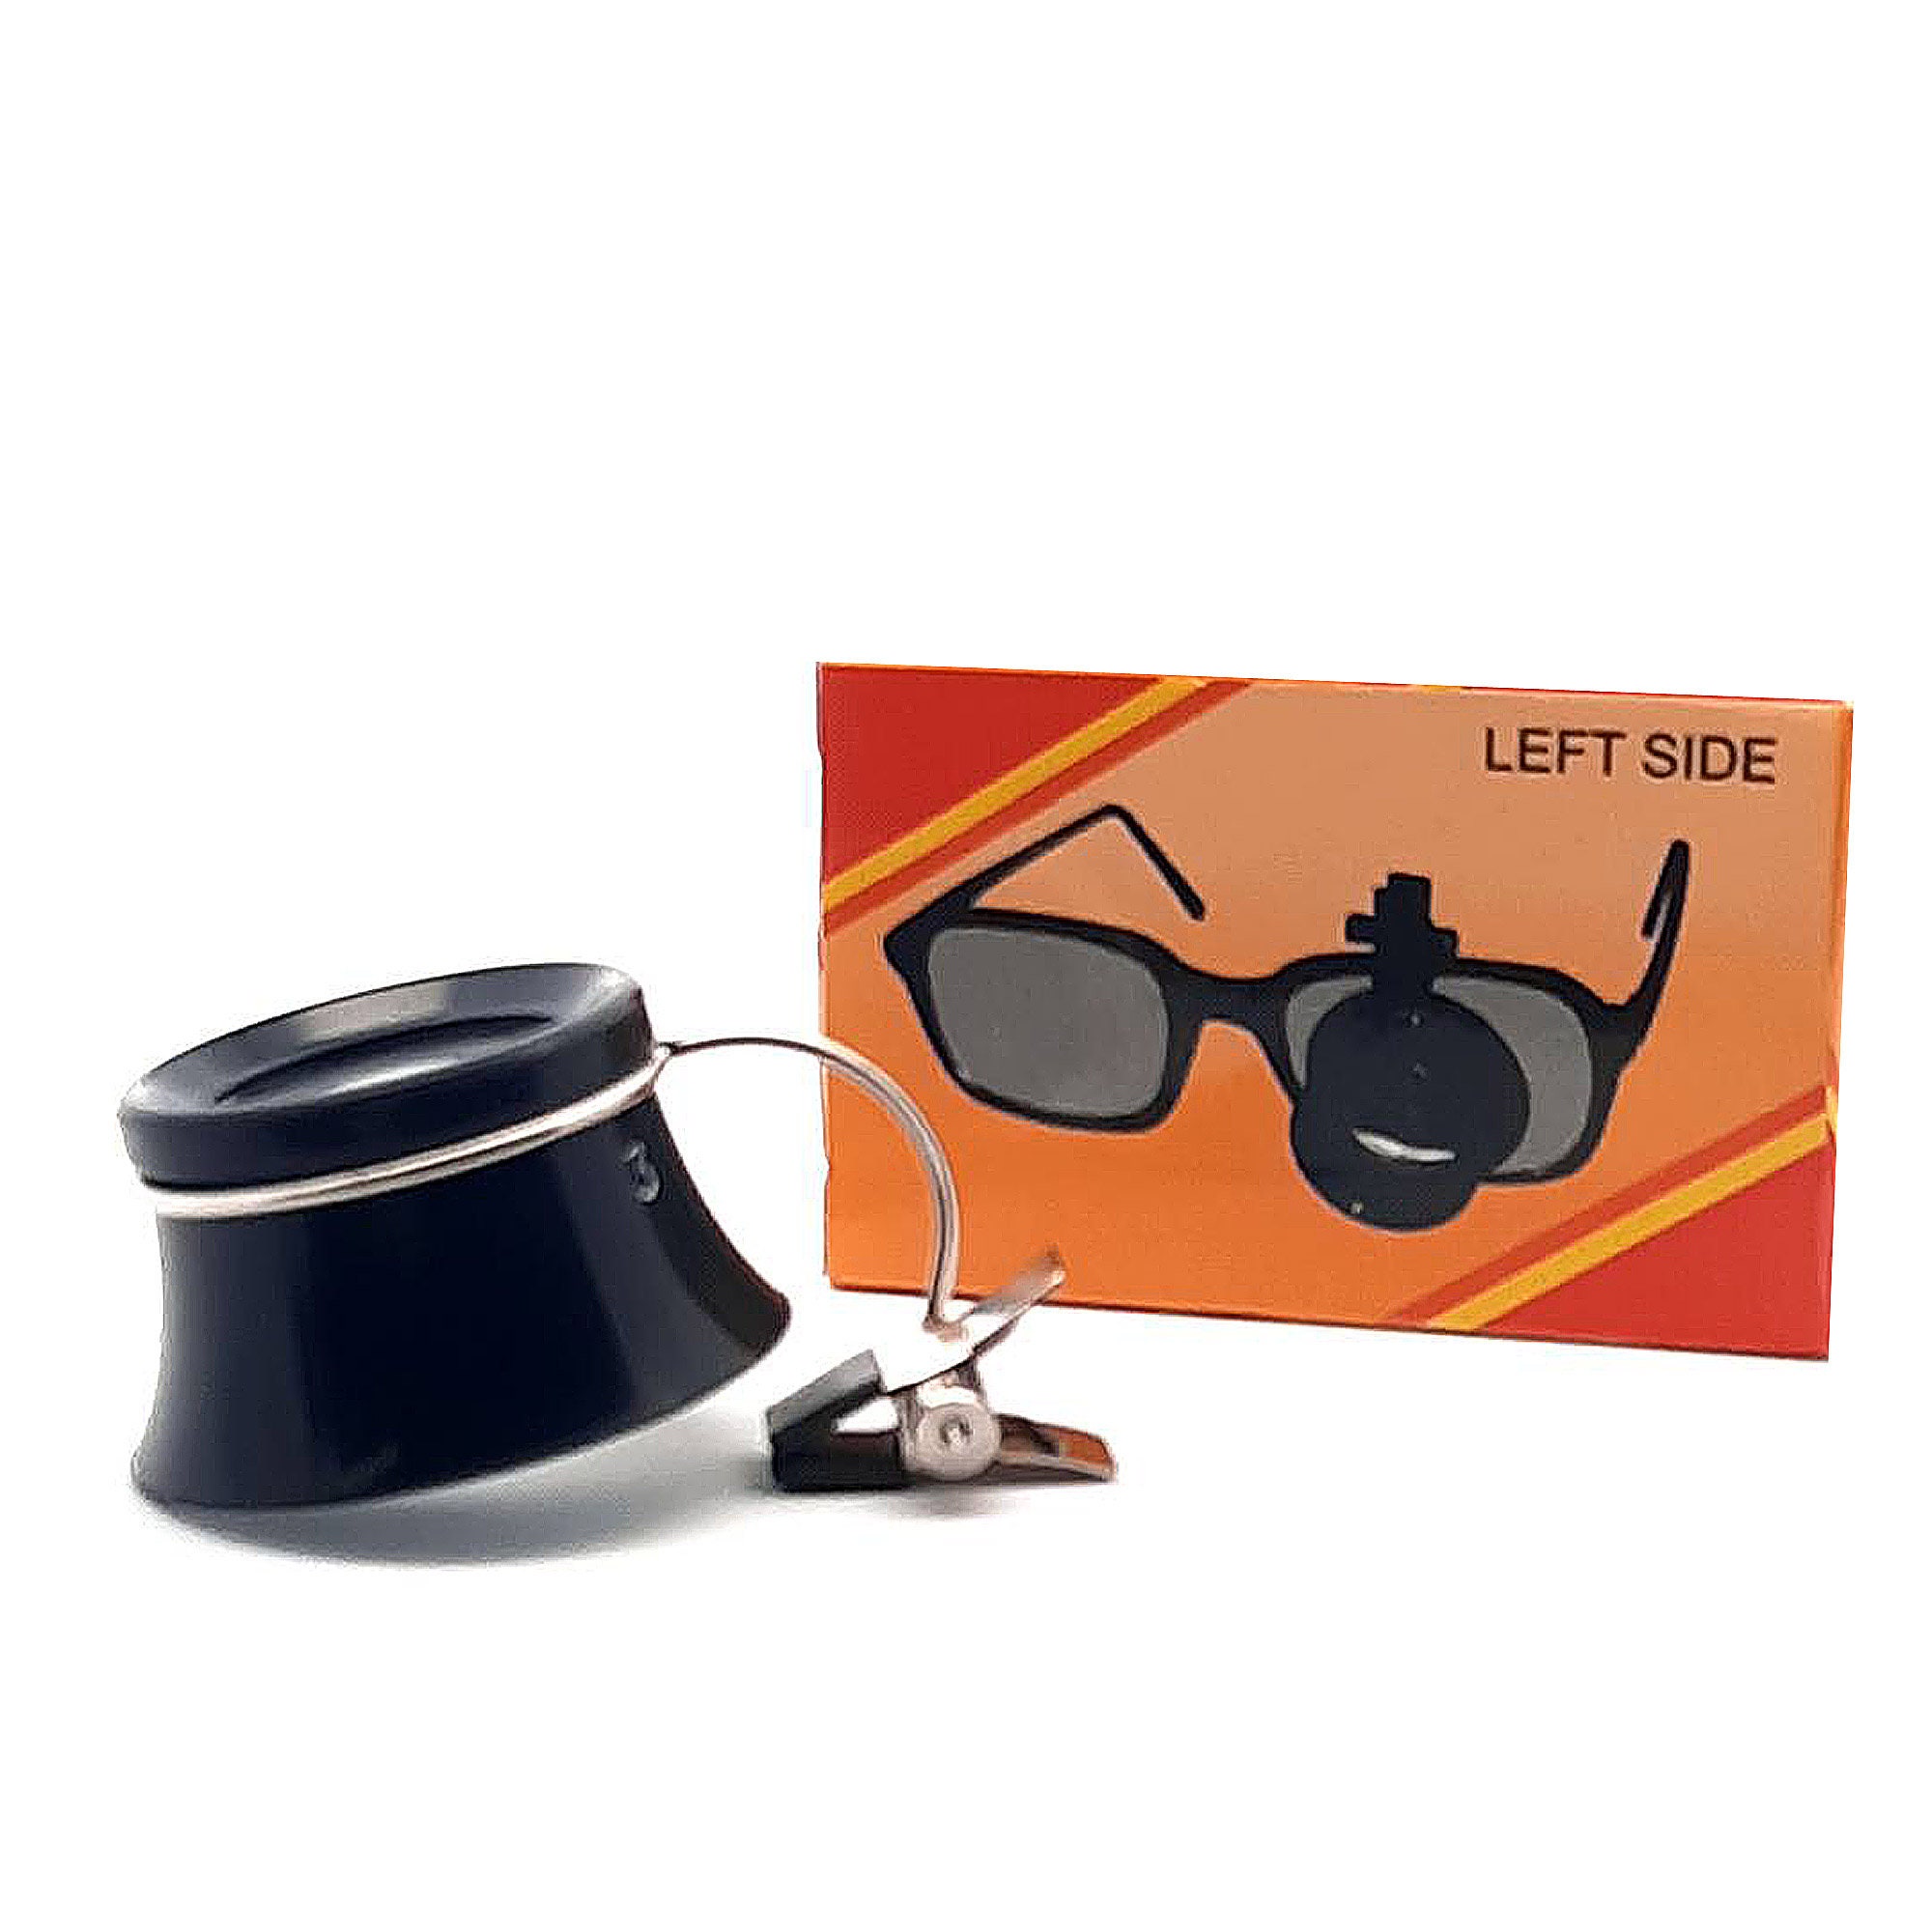 Metal Watchmakers loupe clips to glasses, All metal construction